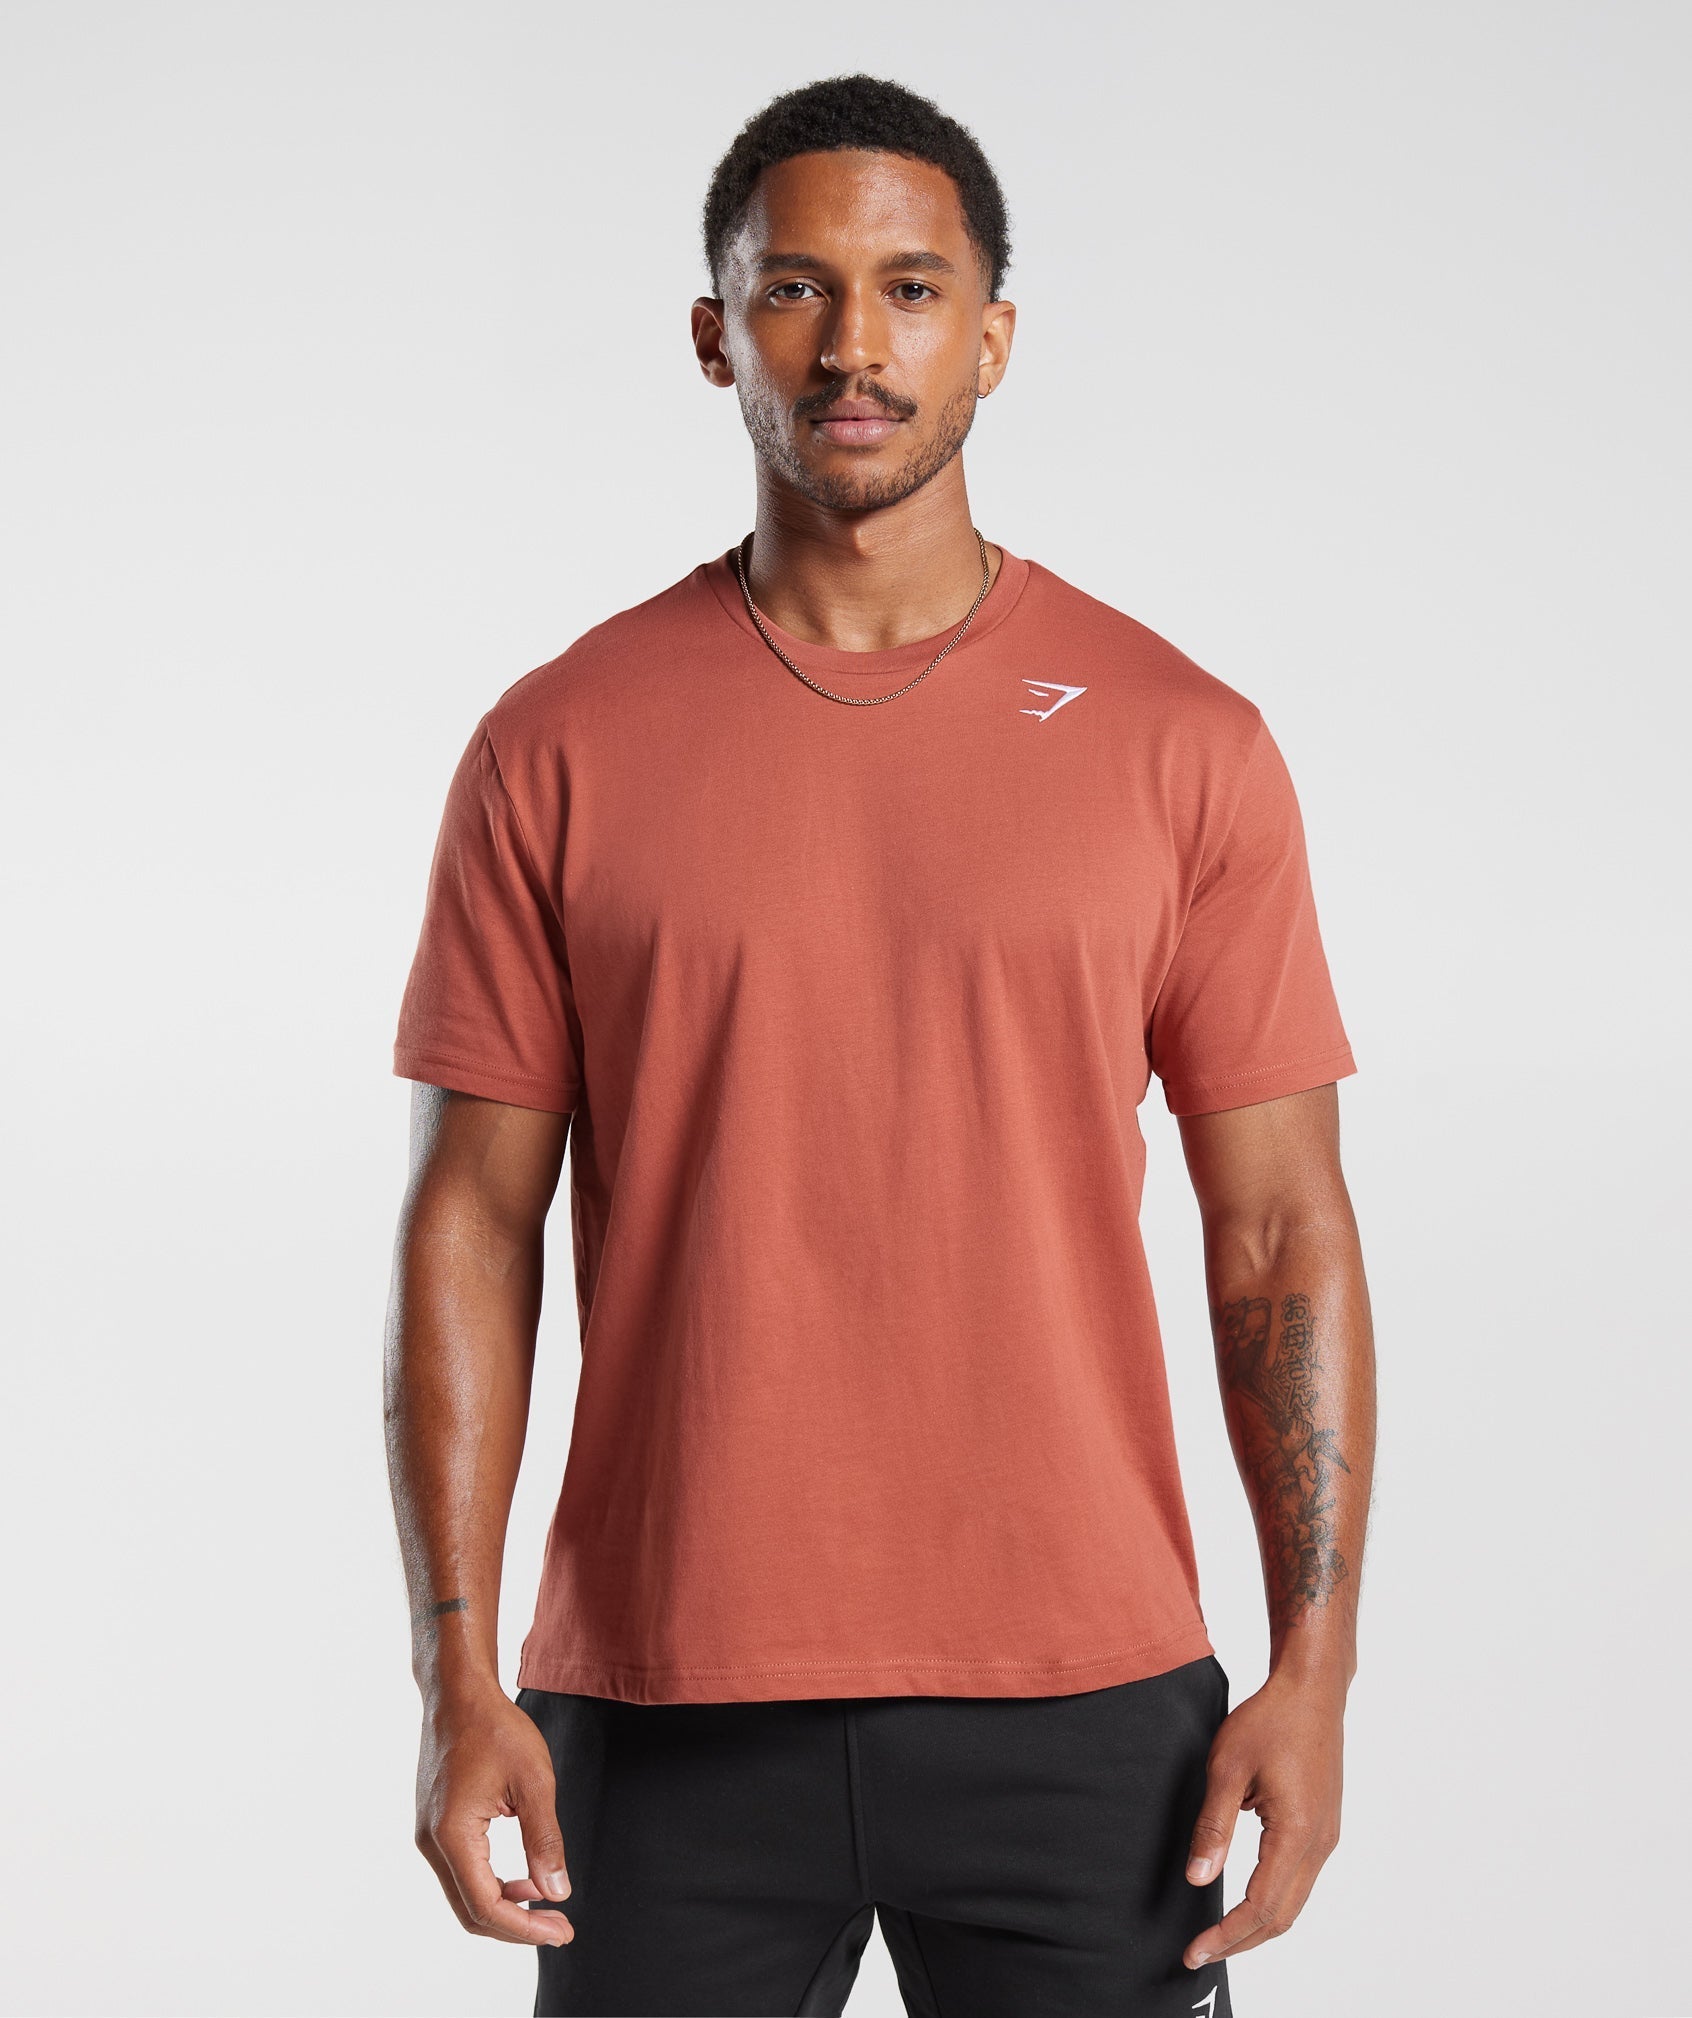 Crest T-Shirt in Persimmon Red - view 1